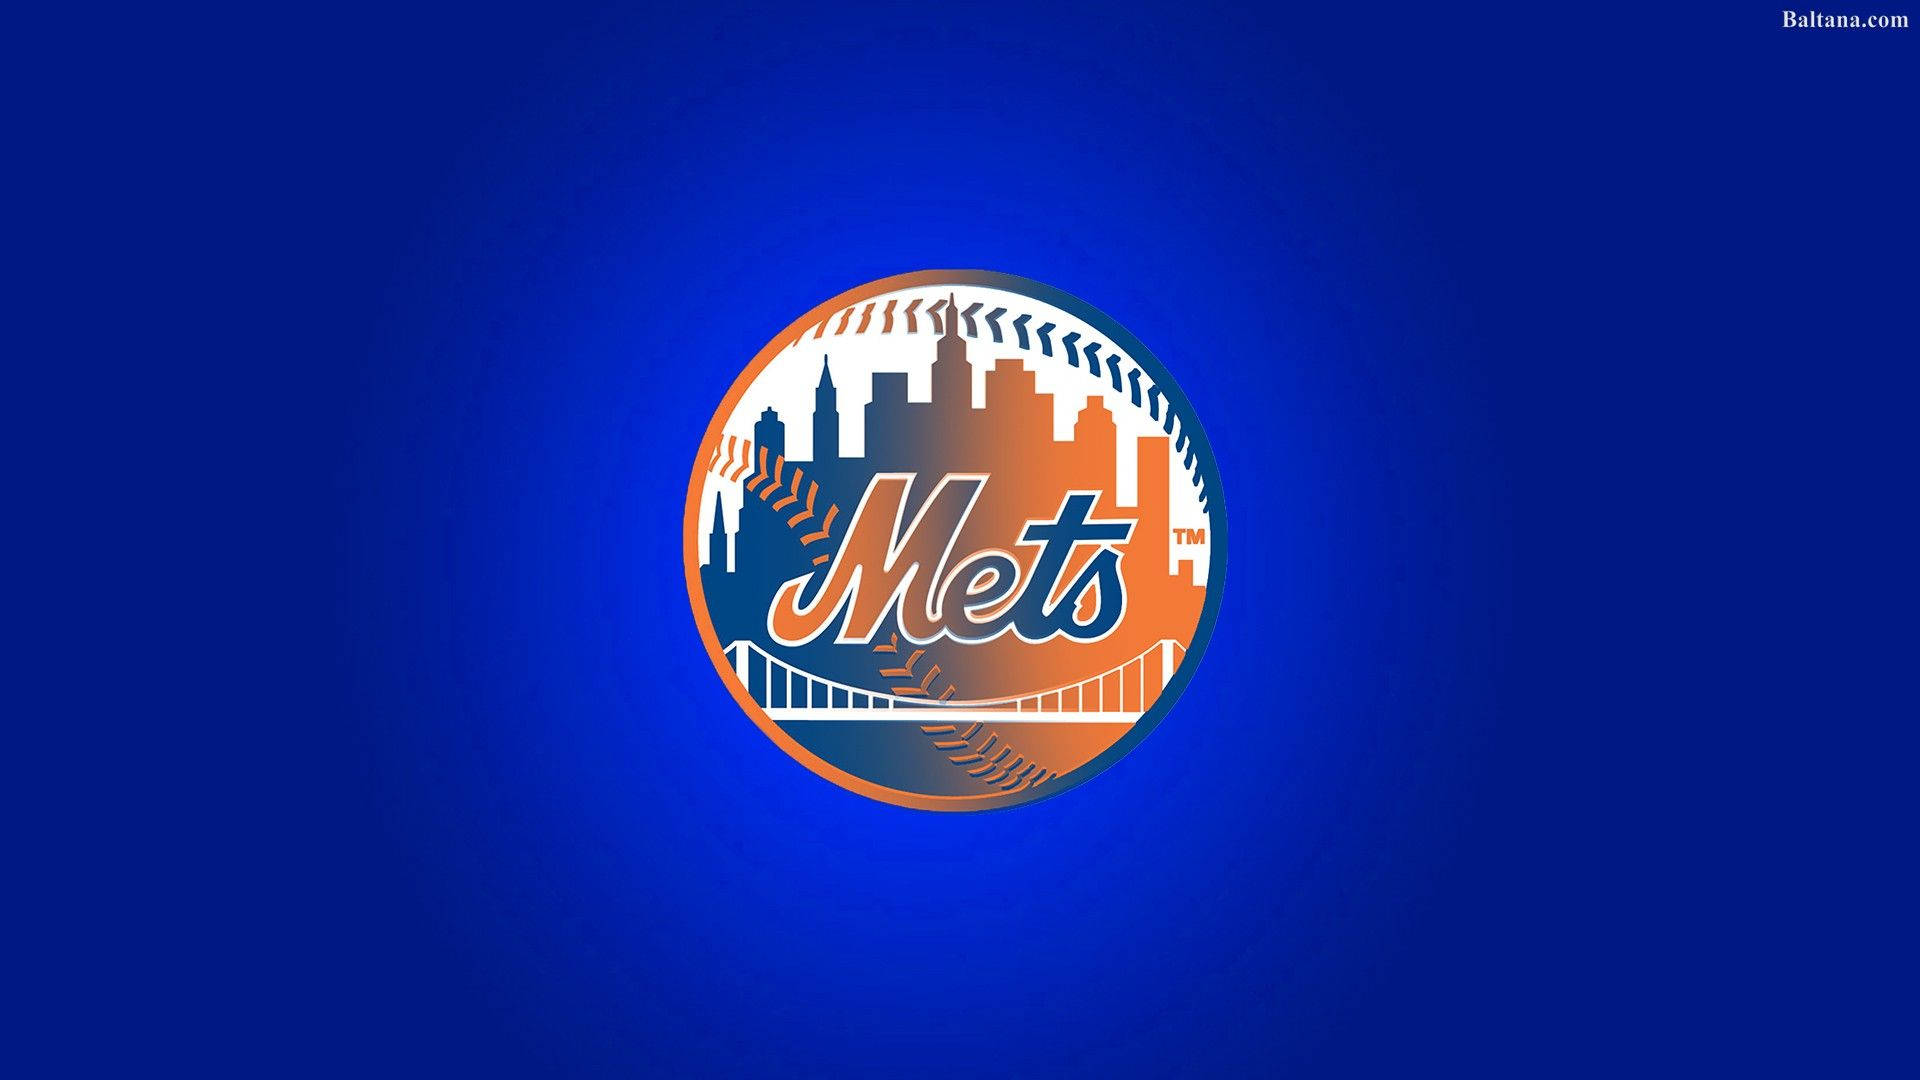 New York Mets In Action - Game Day At The Stadium Wallpaper